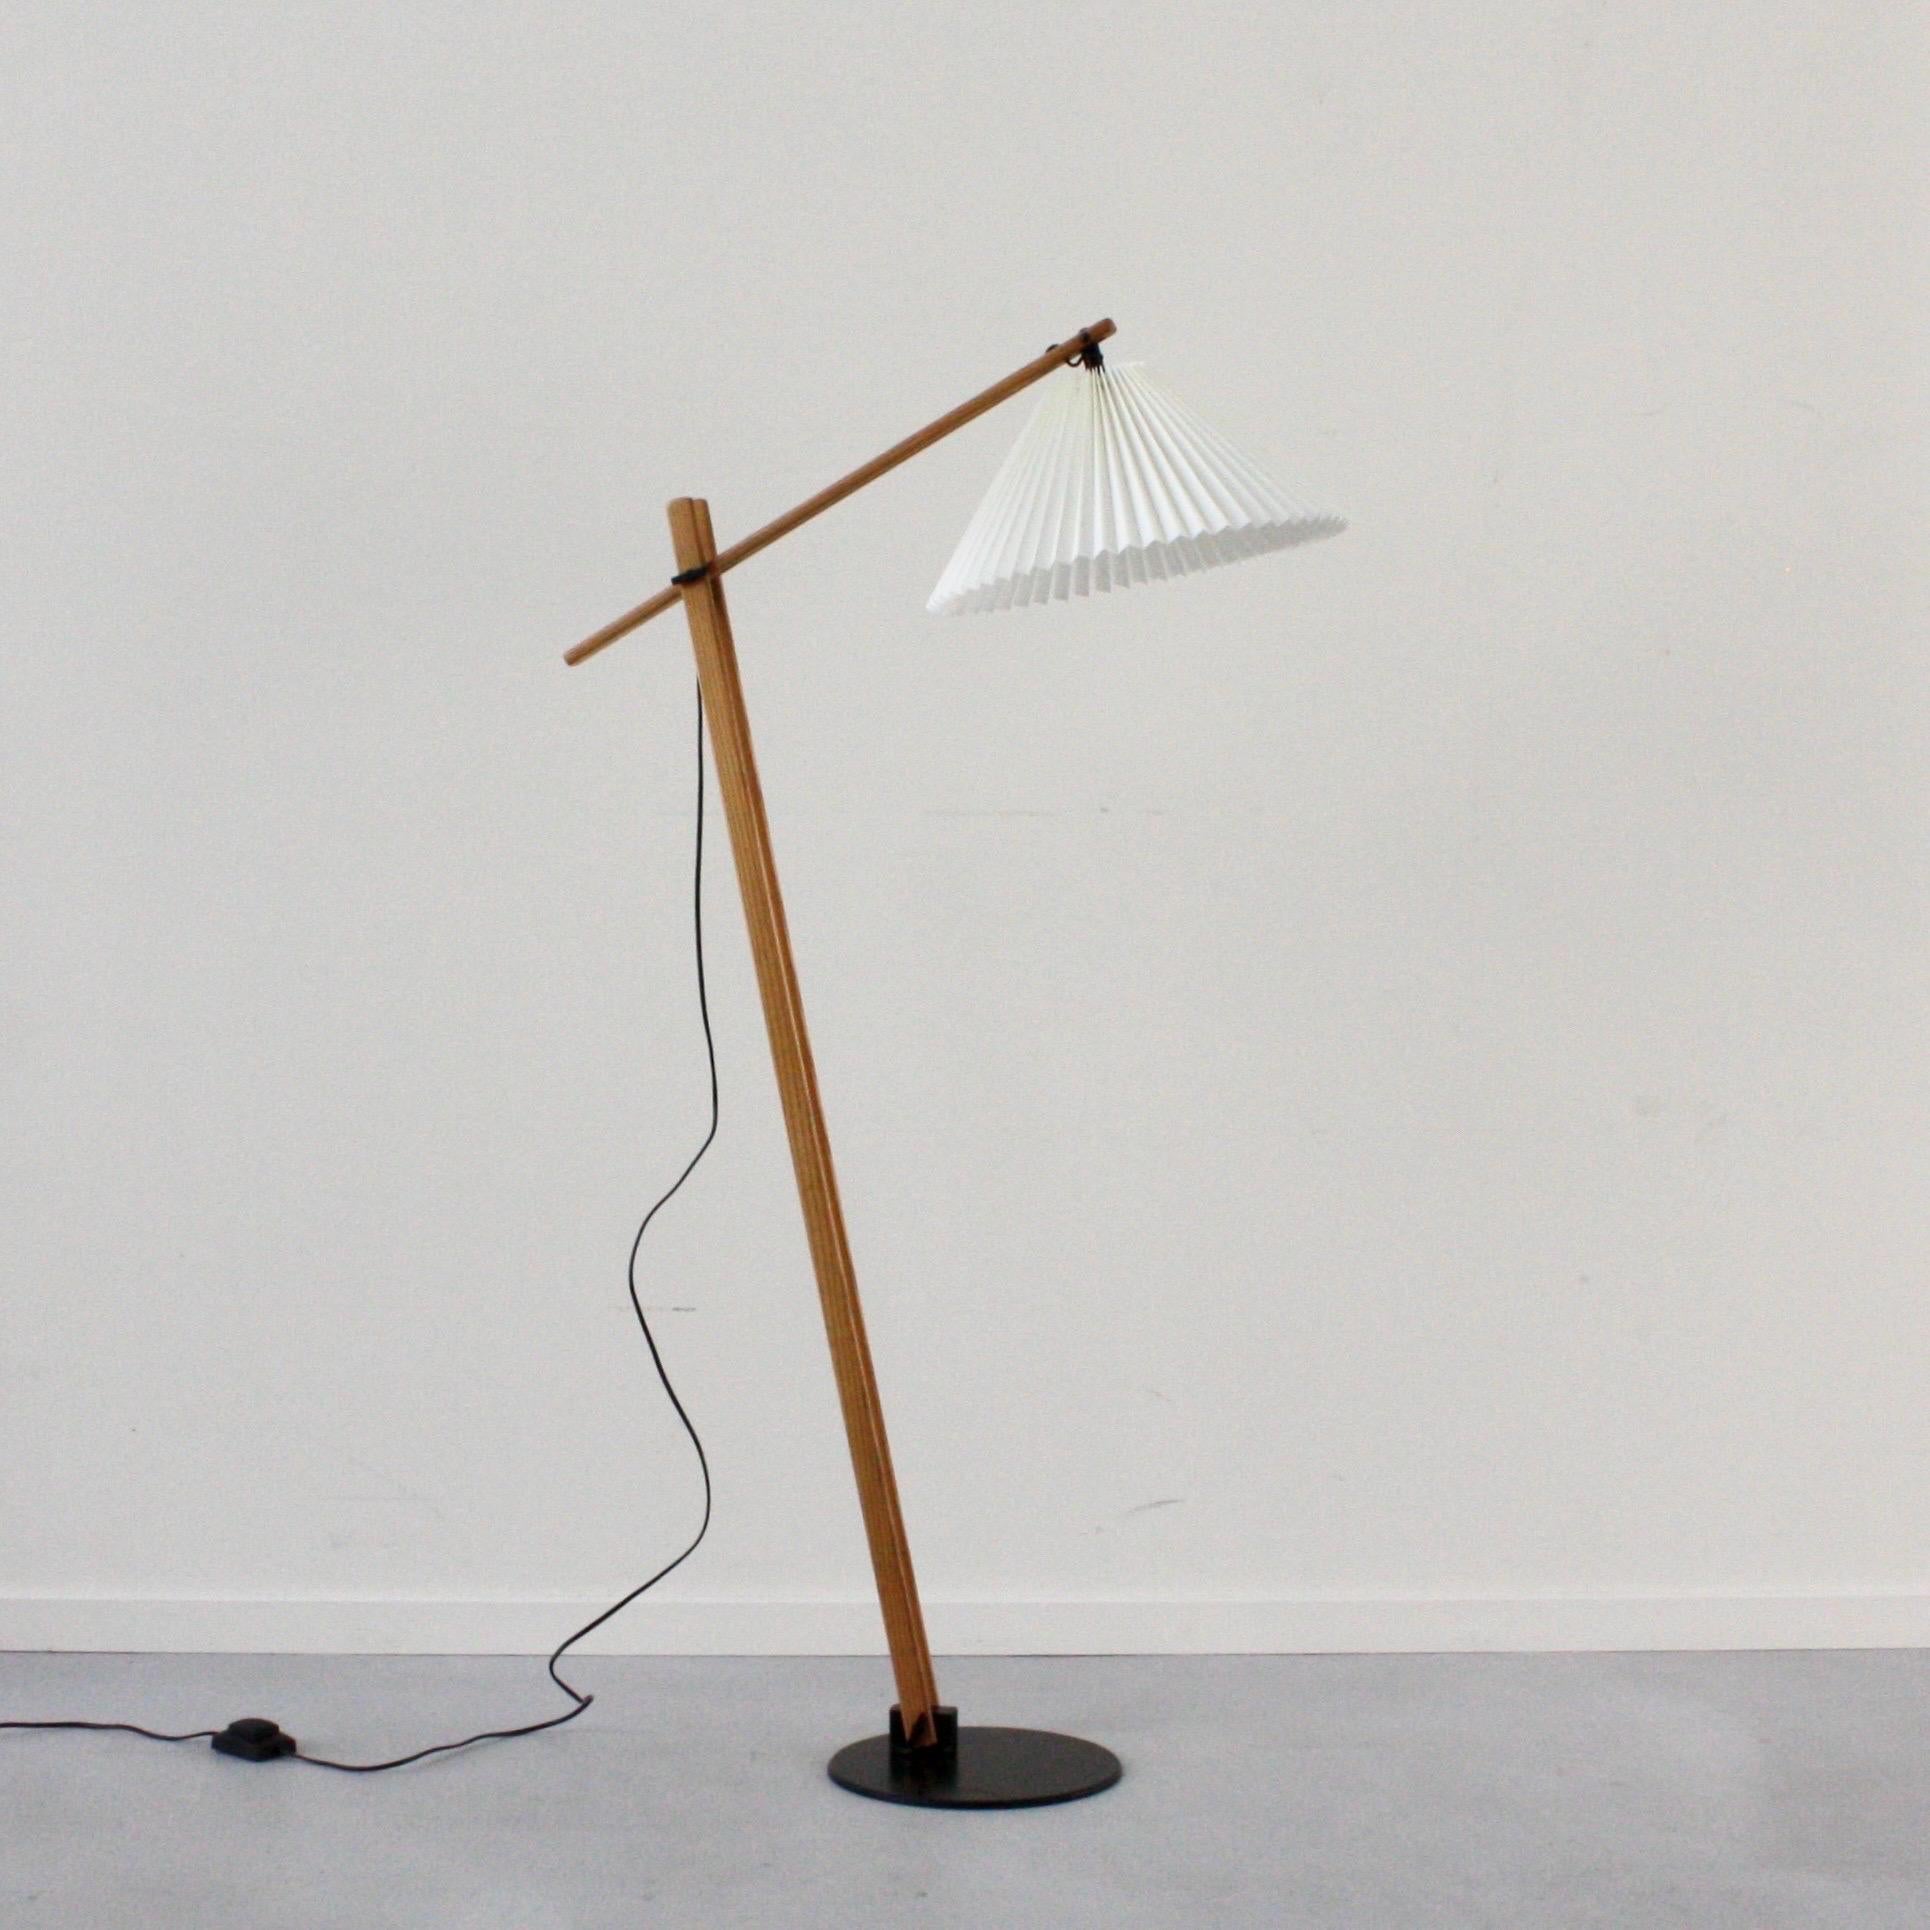 An oak wood floor lamp desinged by Mads Caprani in the 1970s for Caprani Light. This style is a rare find in excellent condition. It features a black metal base, adjustable oak stems and a light colored fabric shade. 

* An oak wood floor lamp with